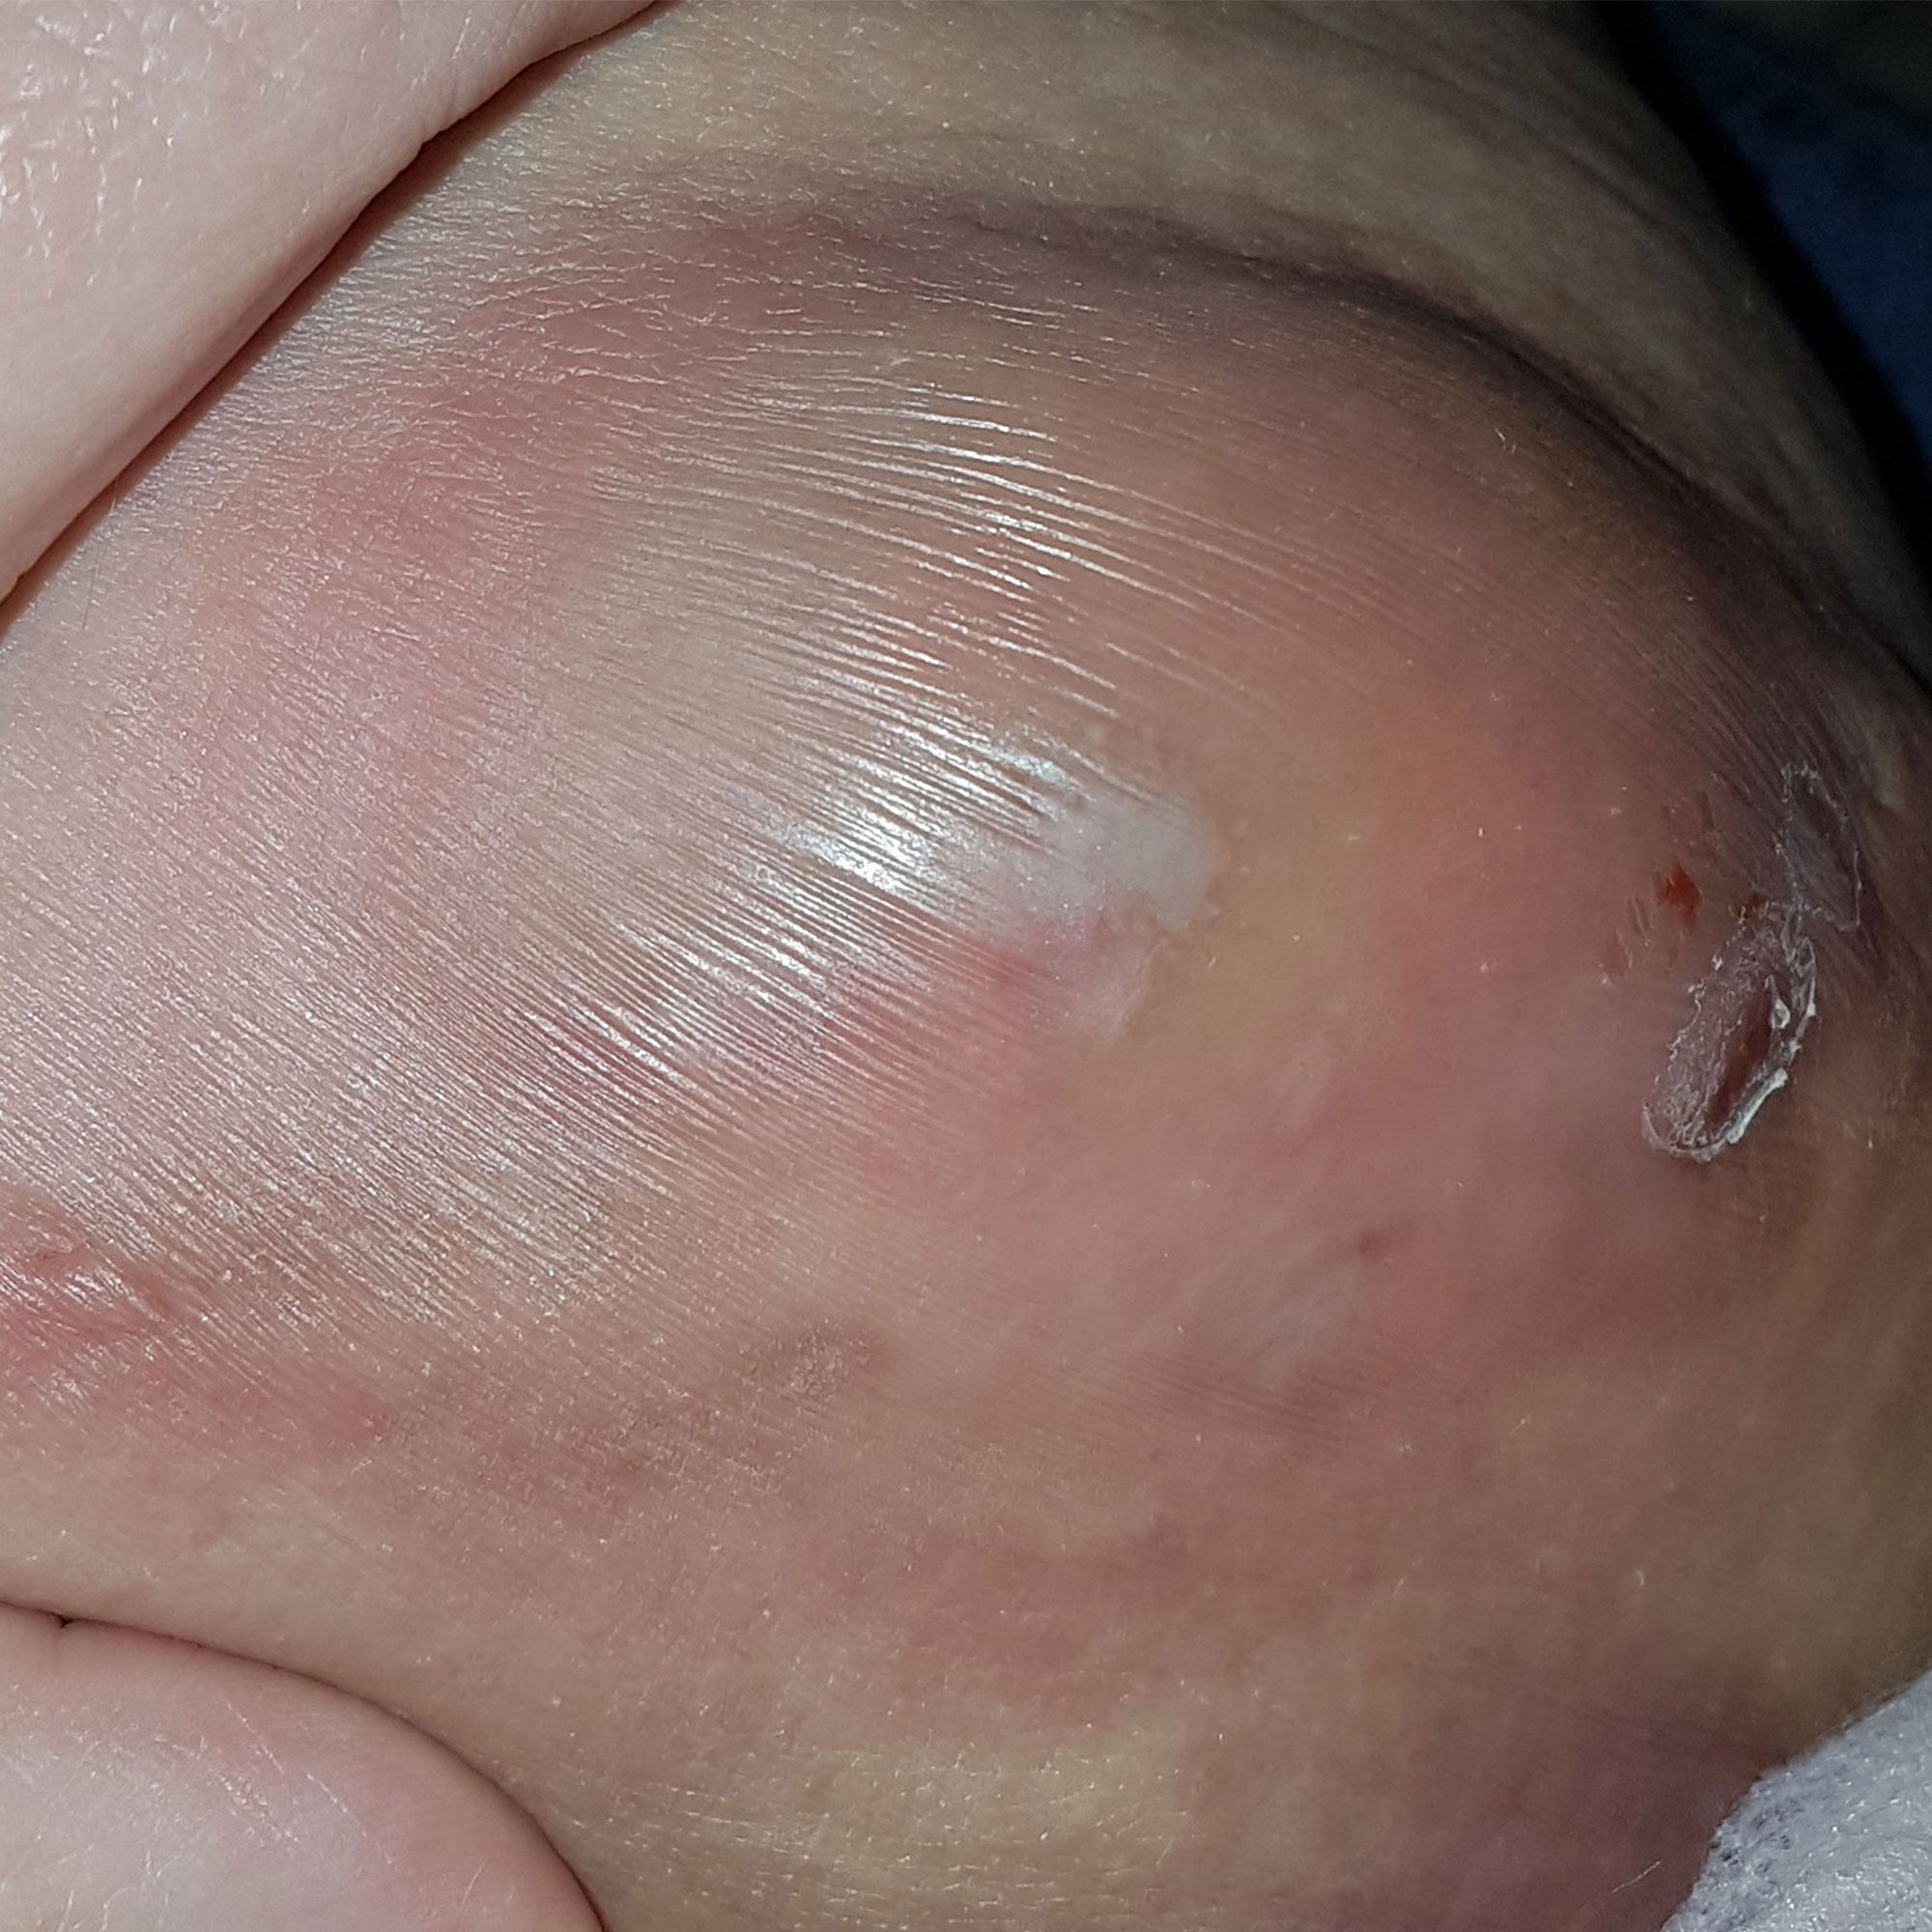 Is this hiradenitis? Having boils come and go on my inner thighs